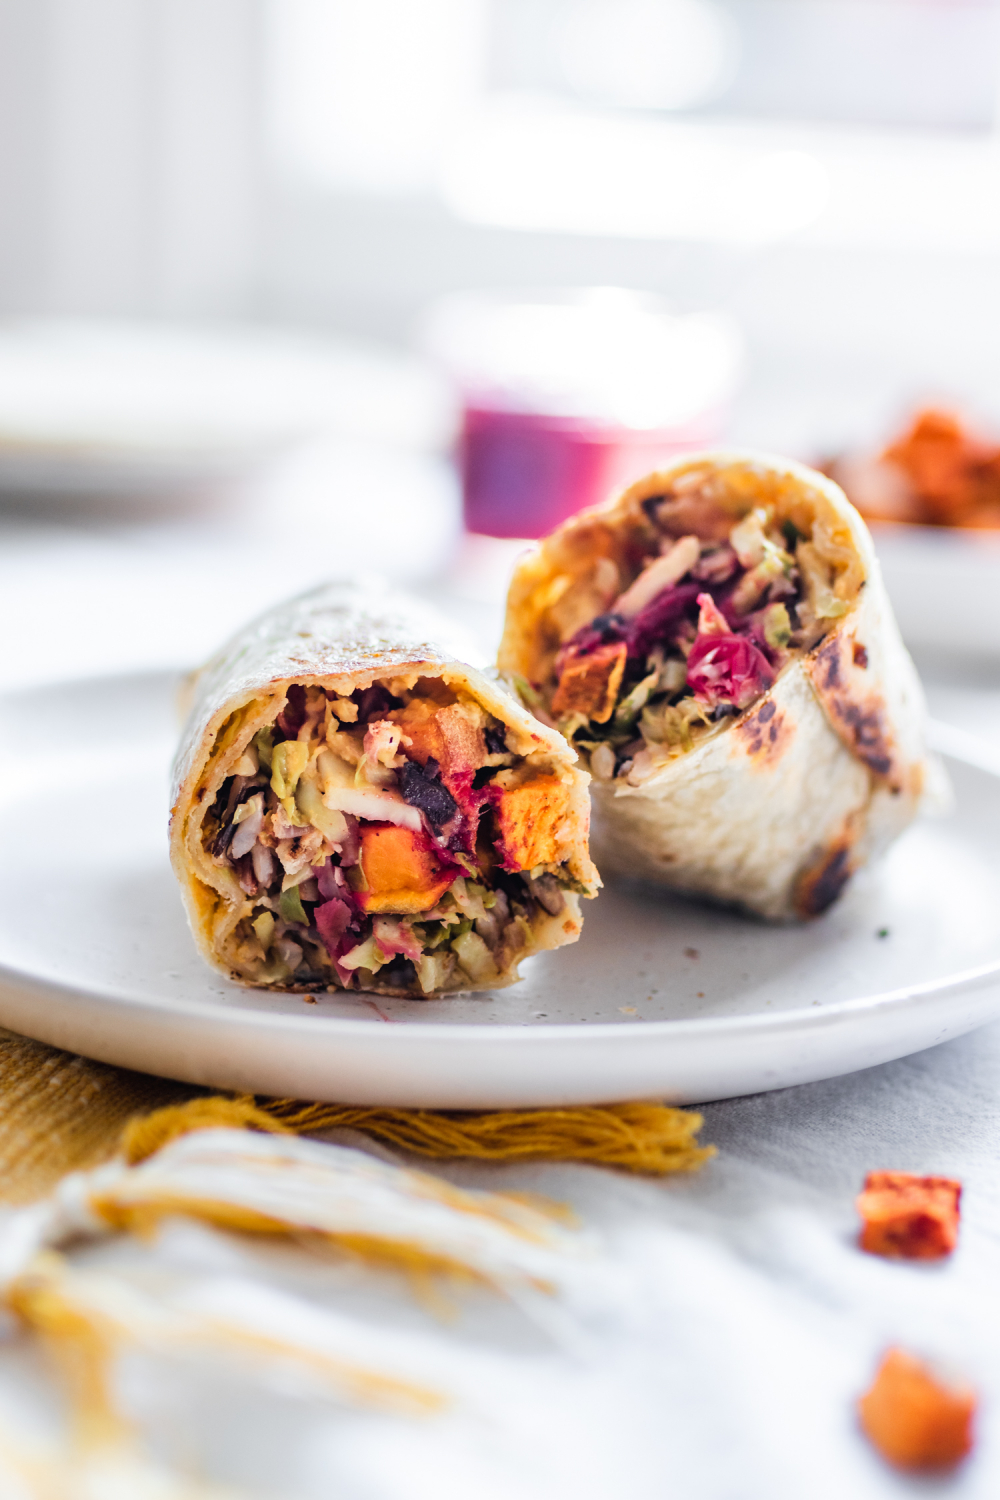 Vegan wrap cut in half, stuffed with squash, brussels sprouts, cranberries, sweet potatoes block-cover-recipe apples